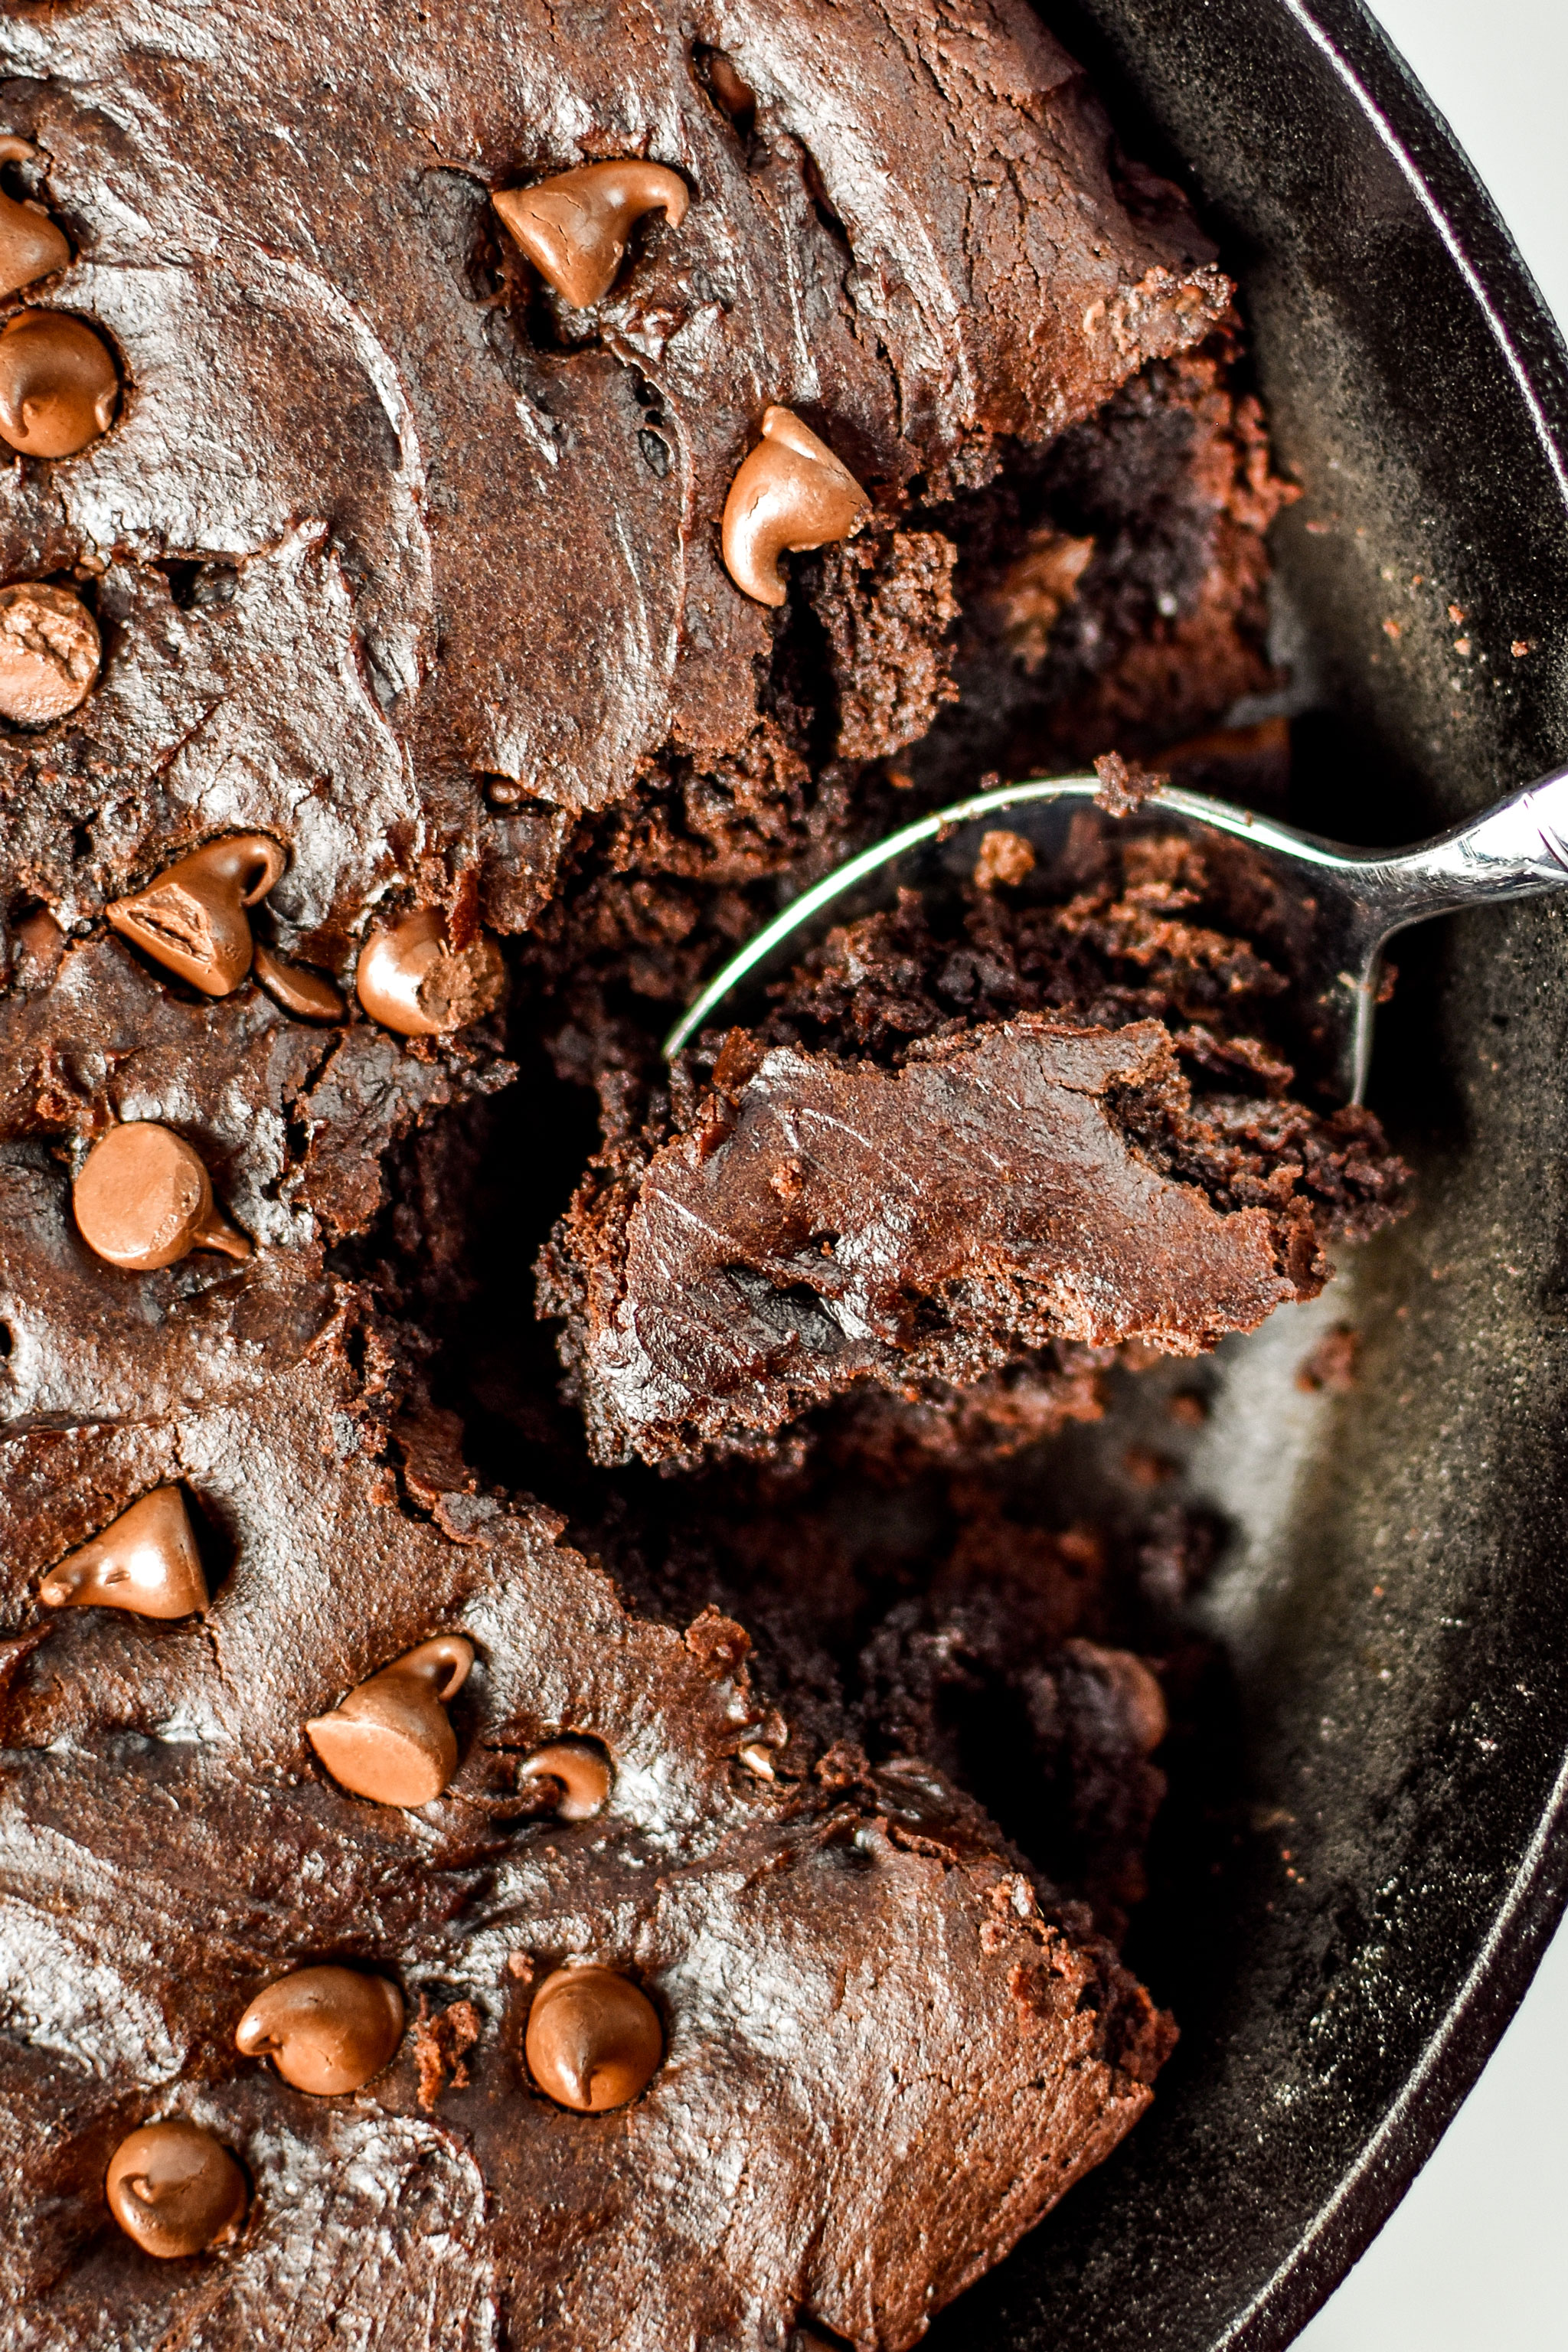 Taking a bit of the sweet potato brownie skillet